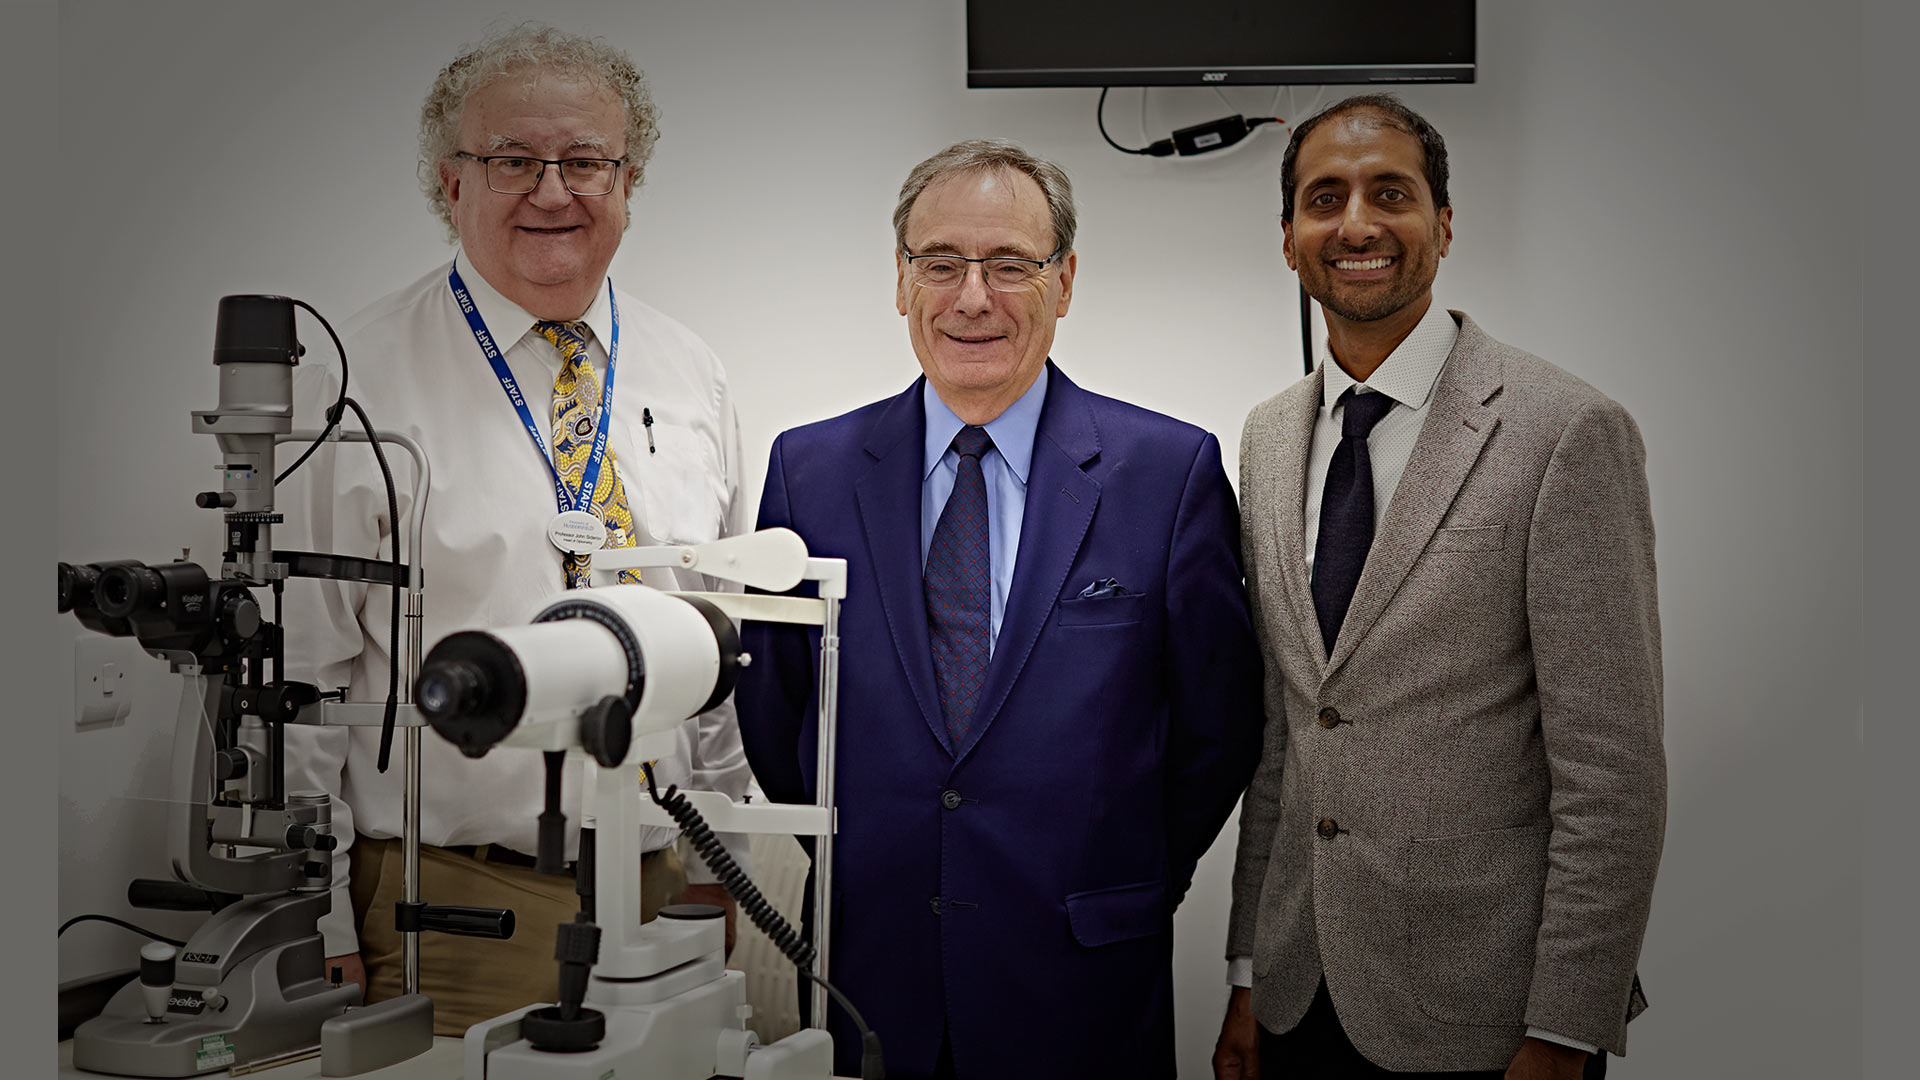 Professor John Siderov, Head of the Department of Optometry and Vision Sciences is pictured far left with the University's Chancellor Sir George Buckley (centre) and Moin Valli, the managing director of Valli Opticians